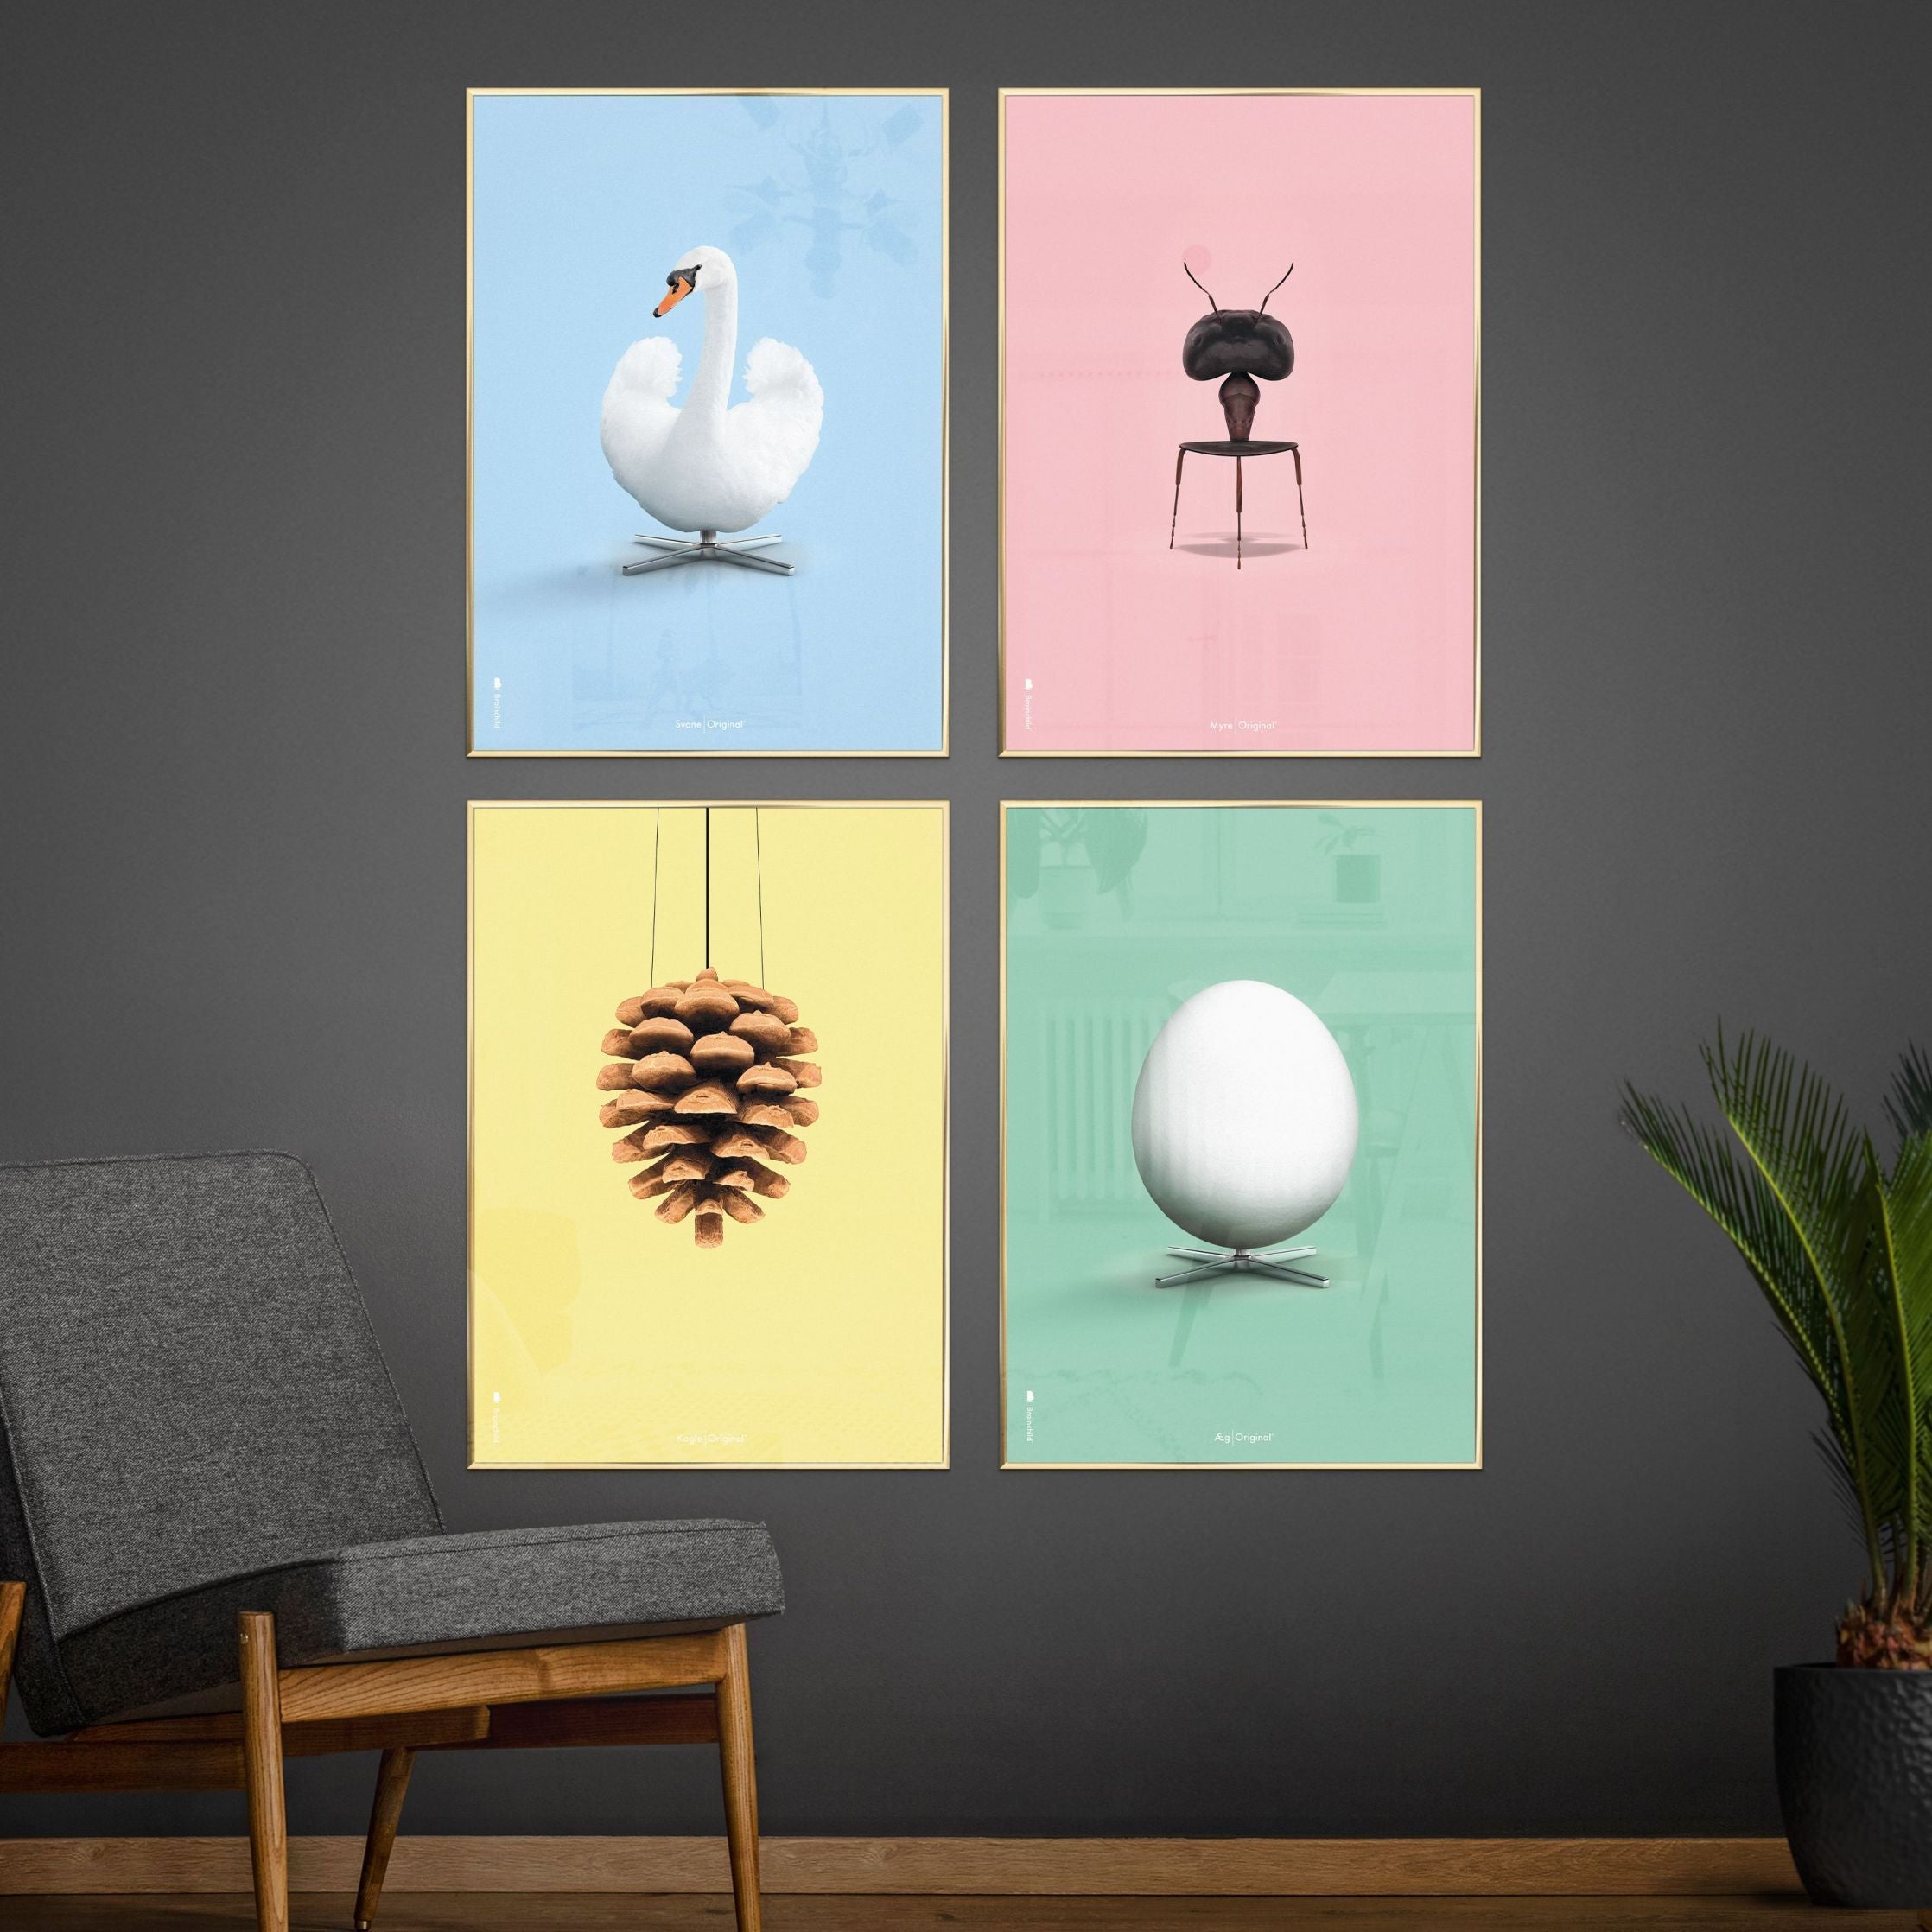 Brainchild Pine Cone Classic Poster, Brass Colored Frame A5, Yellow Background